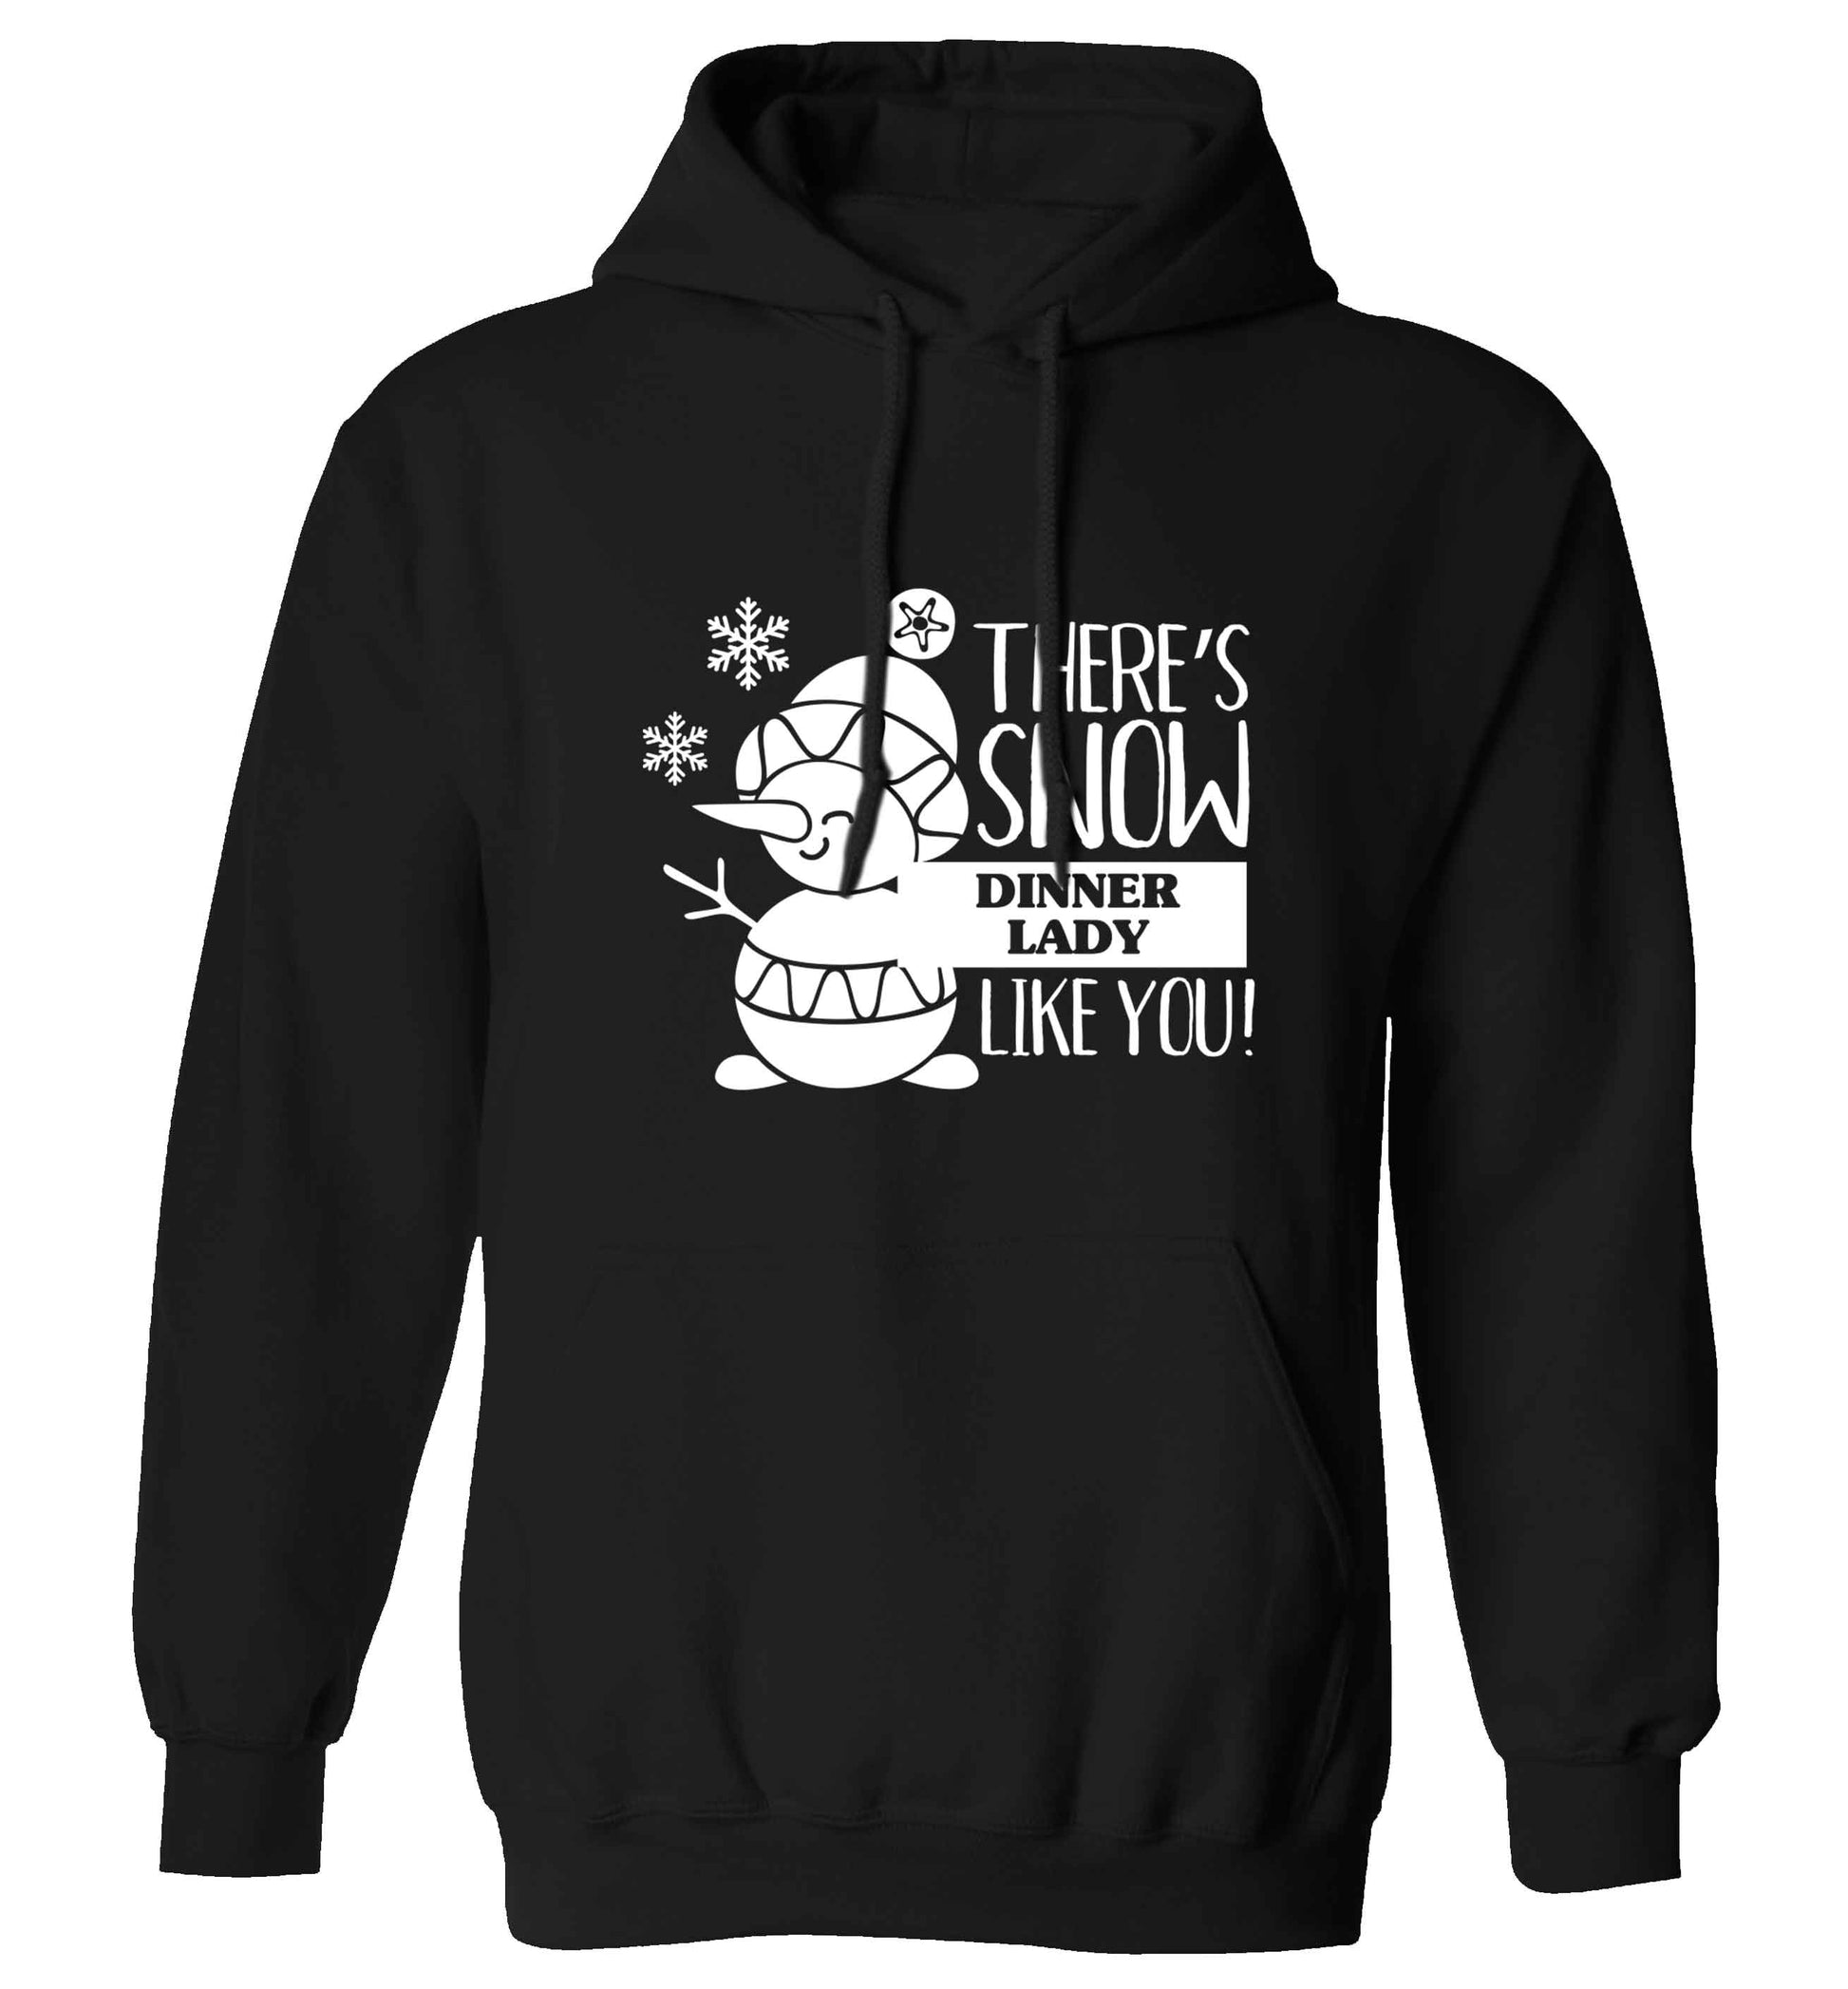 There's snow dinner lady like you adults unisex black hoodie 2XL